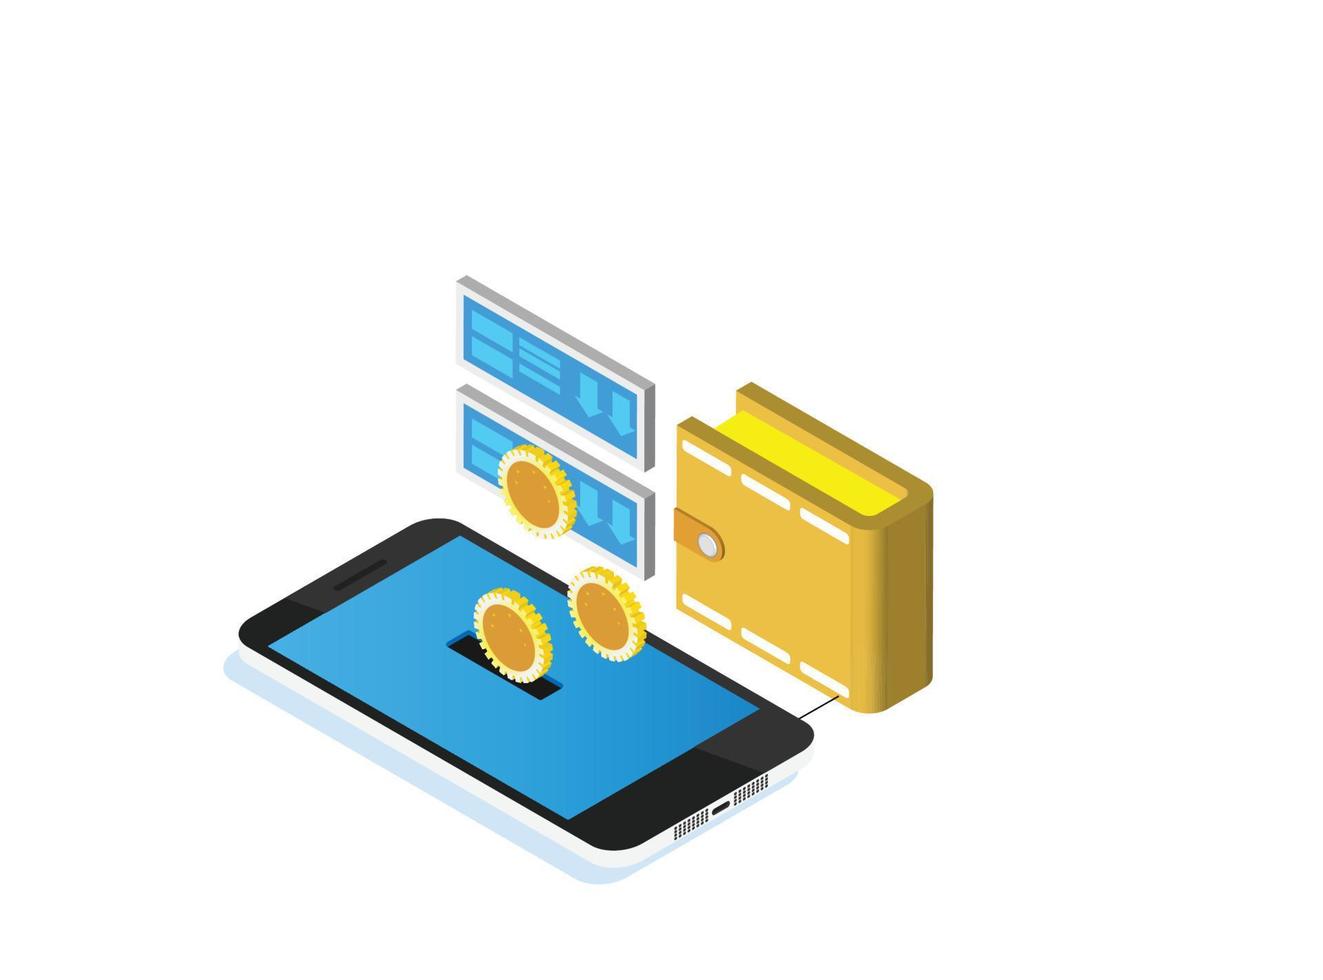 Wallet isometric icon isolated. Created For Mobile, Web, Print Products, Applications. Vector illustration. Suitable for Diagrams, Infographics, Game Asset, And Other Graphic Related Assets